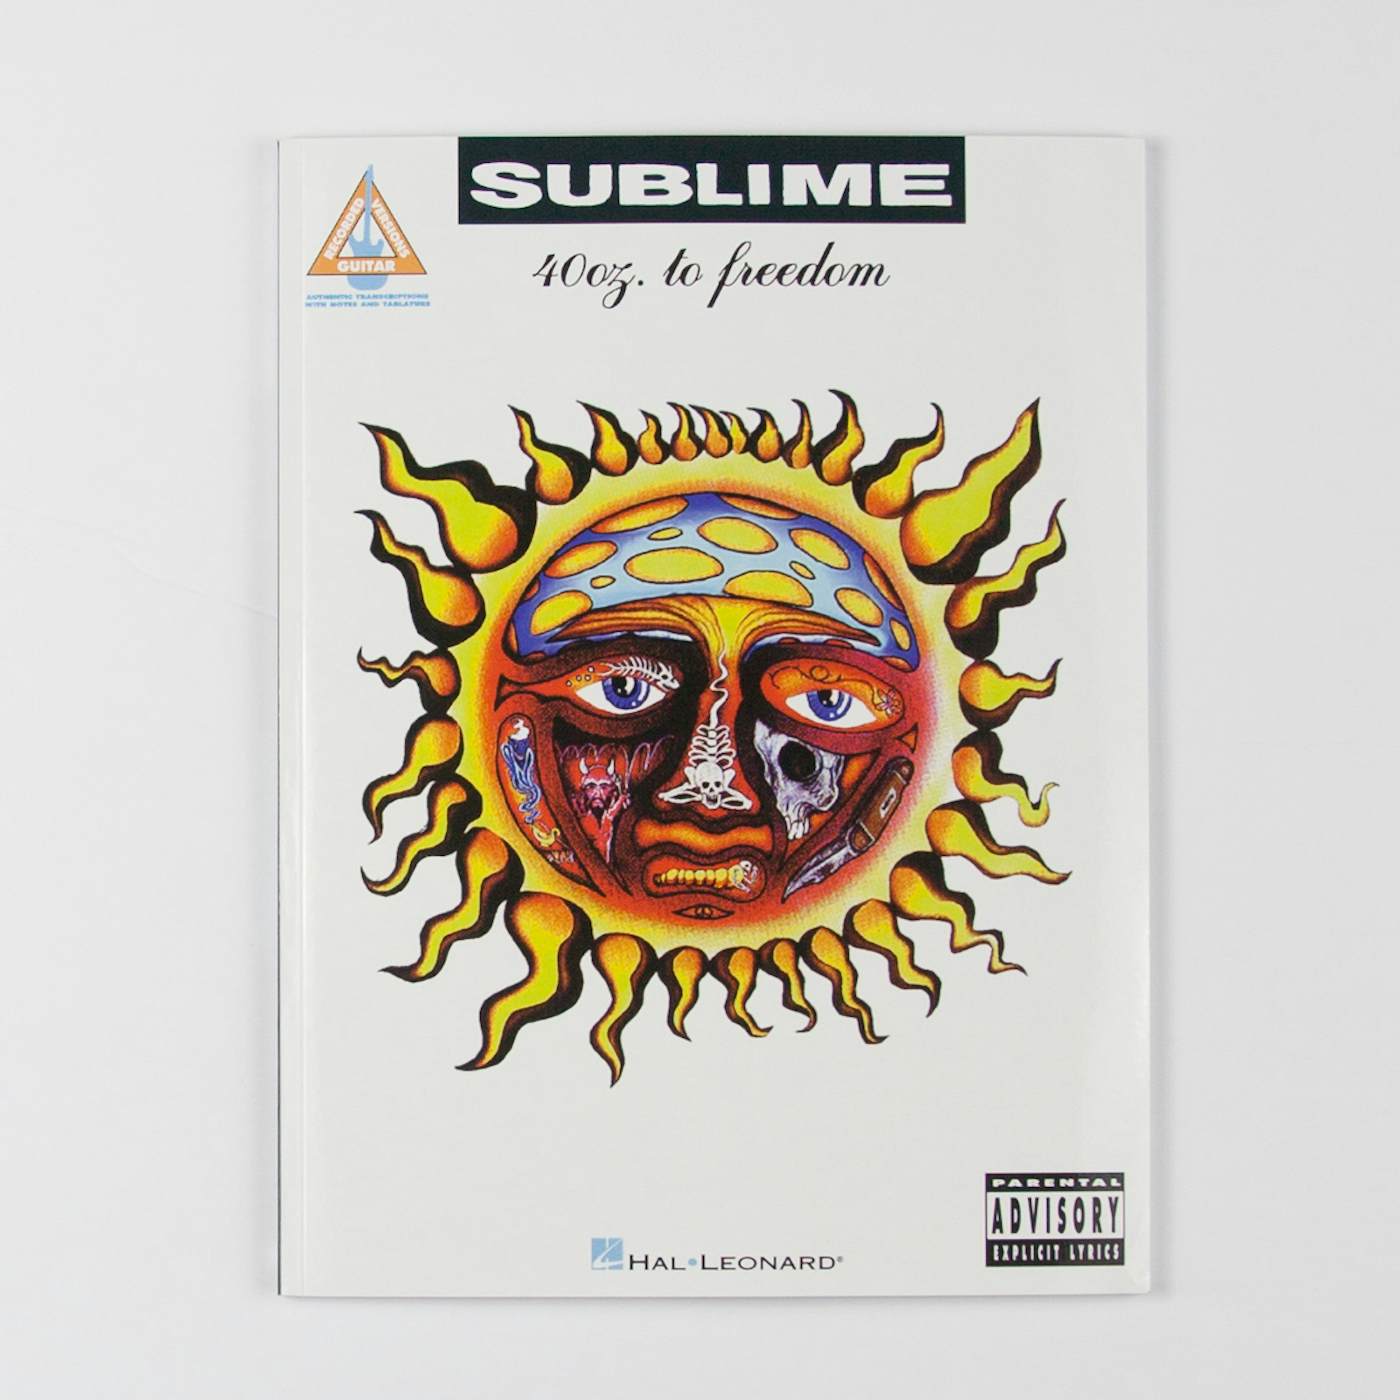 Sublime 40 Oz. To Freedom Songbook